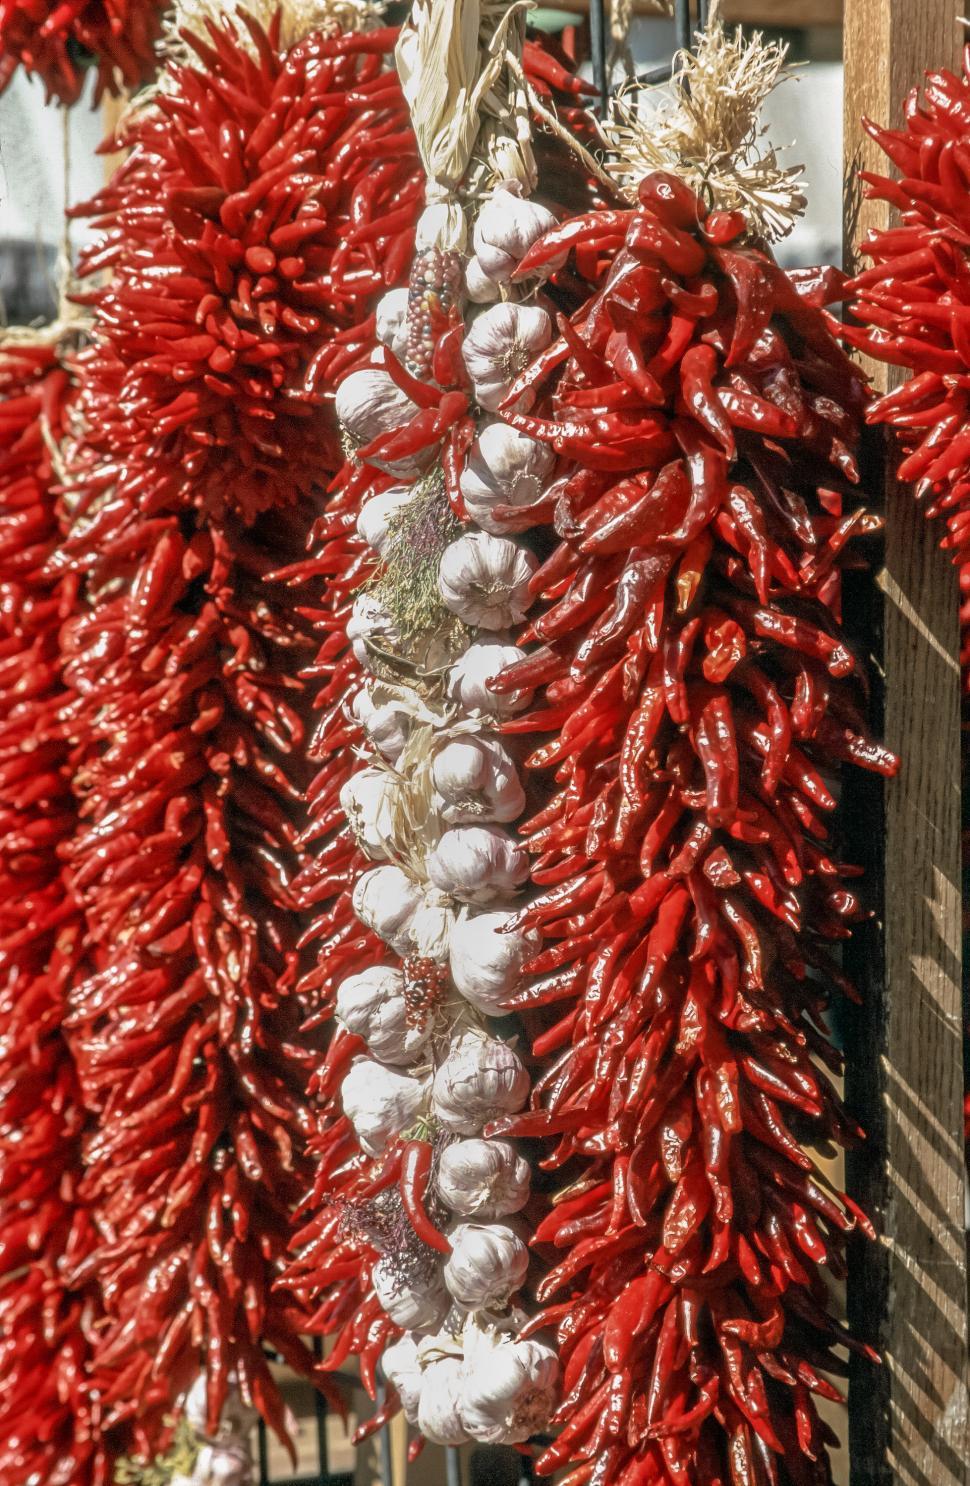 Free Image of Garlic and red chillies 